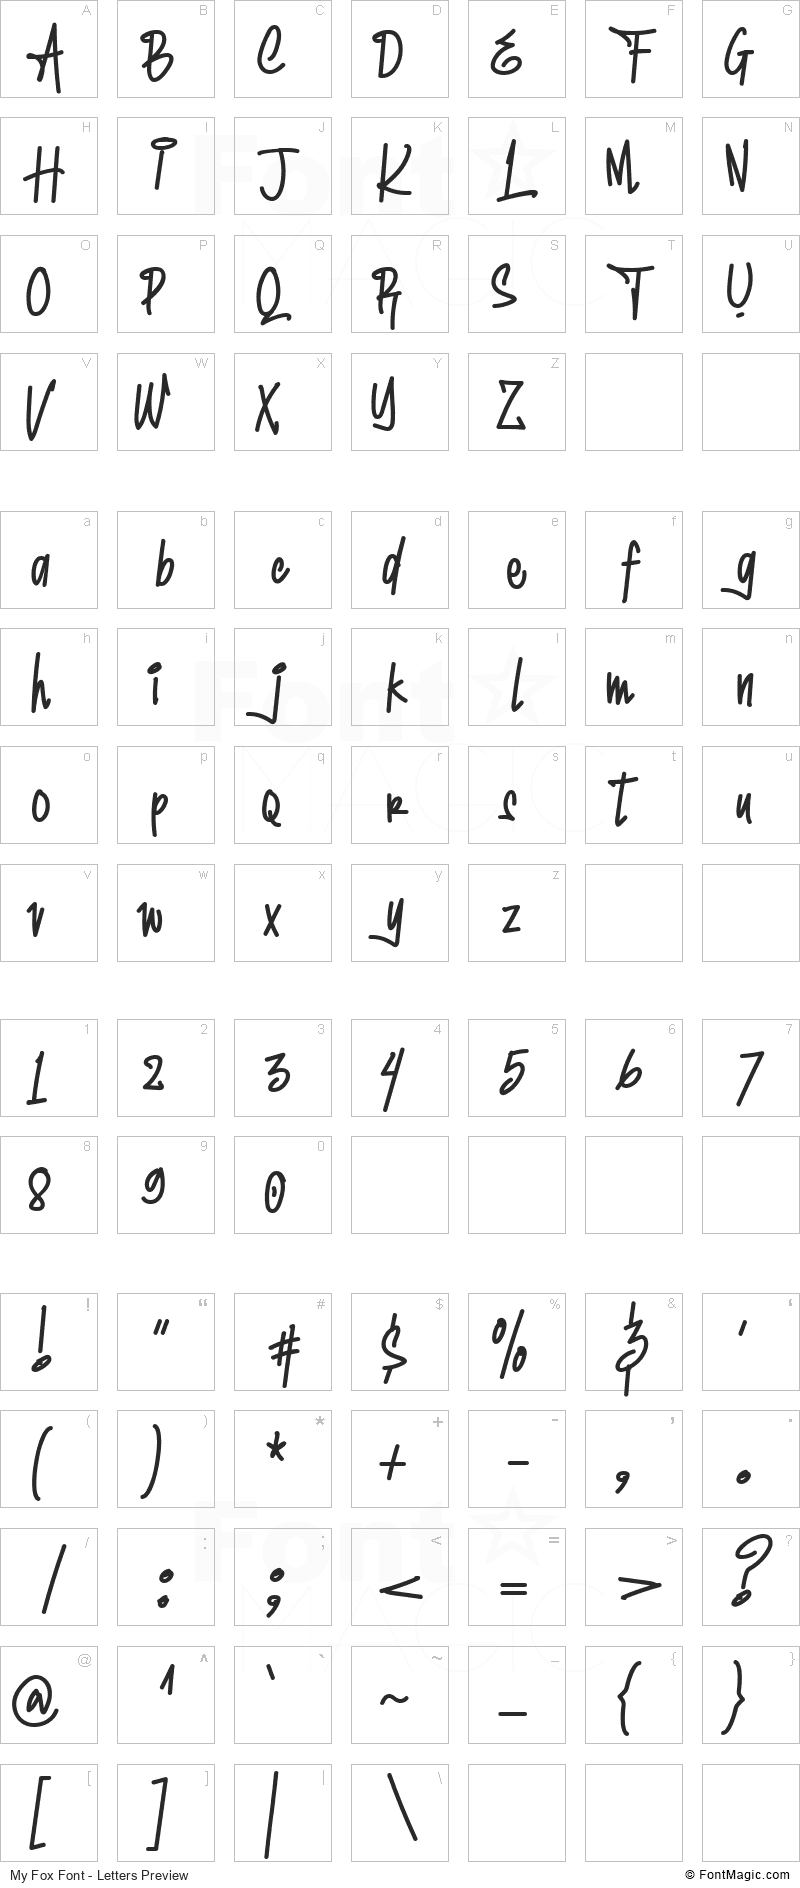 My Fox Font - All Latters Preview Chart